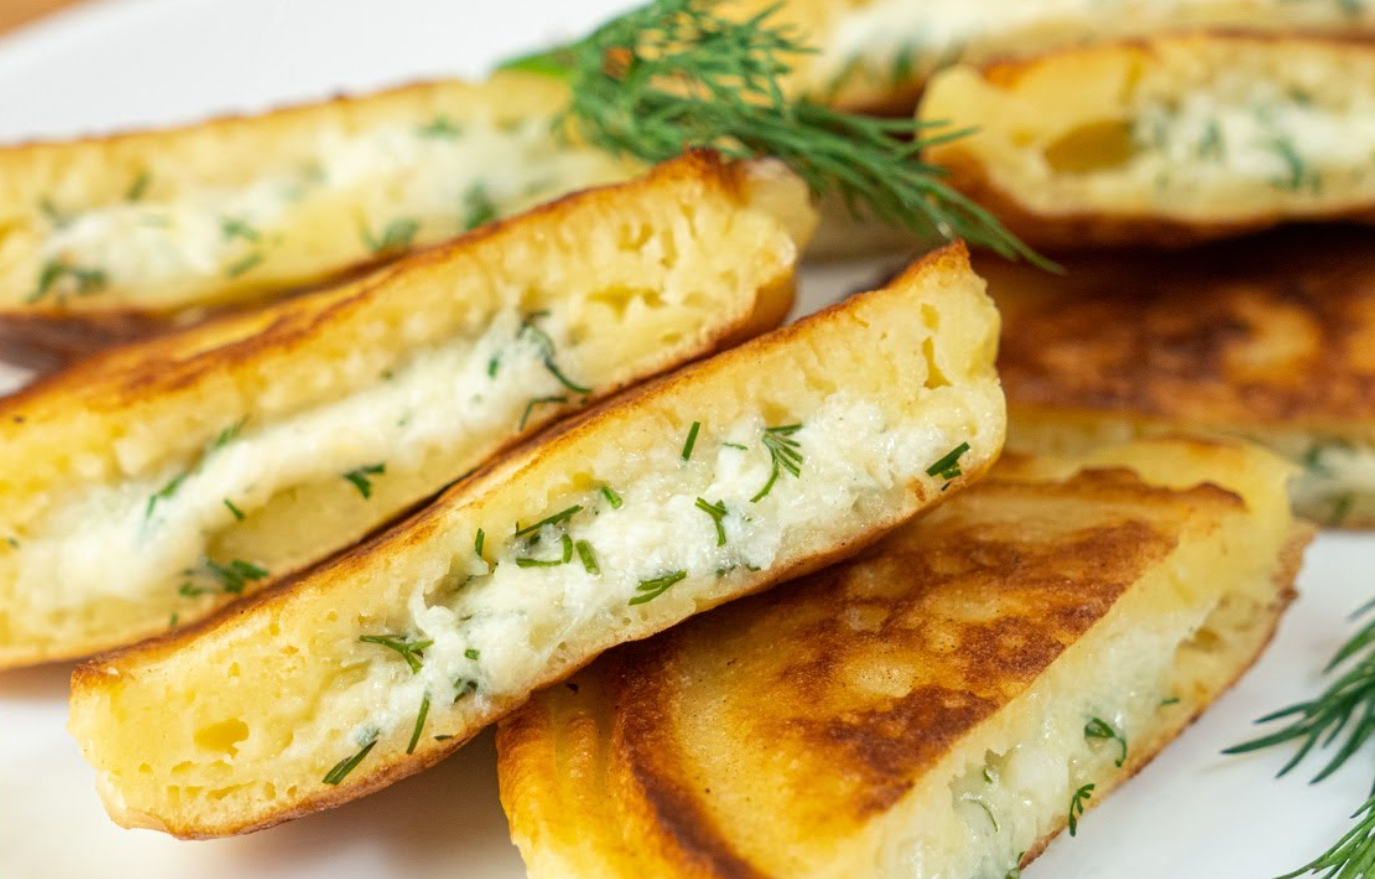 A recipe for cheese fritters like khachapuri.